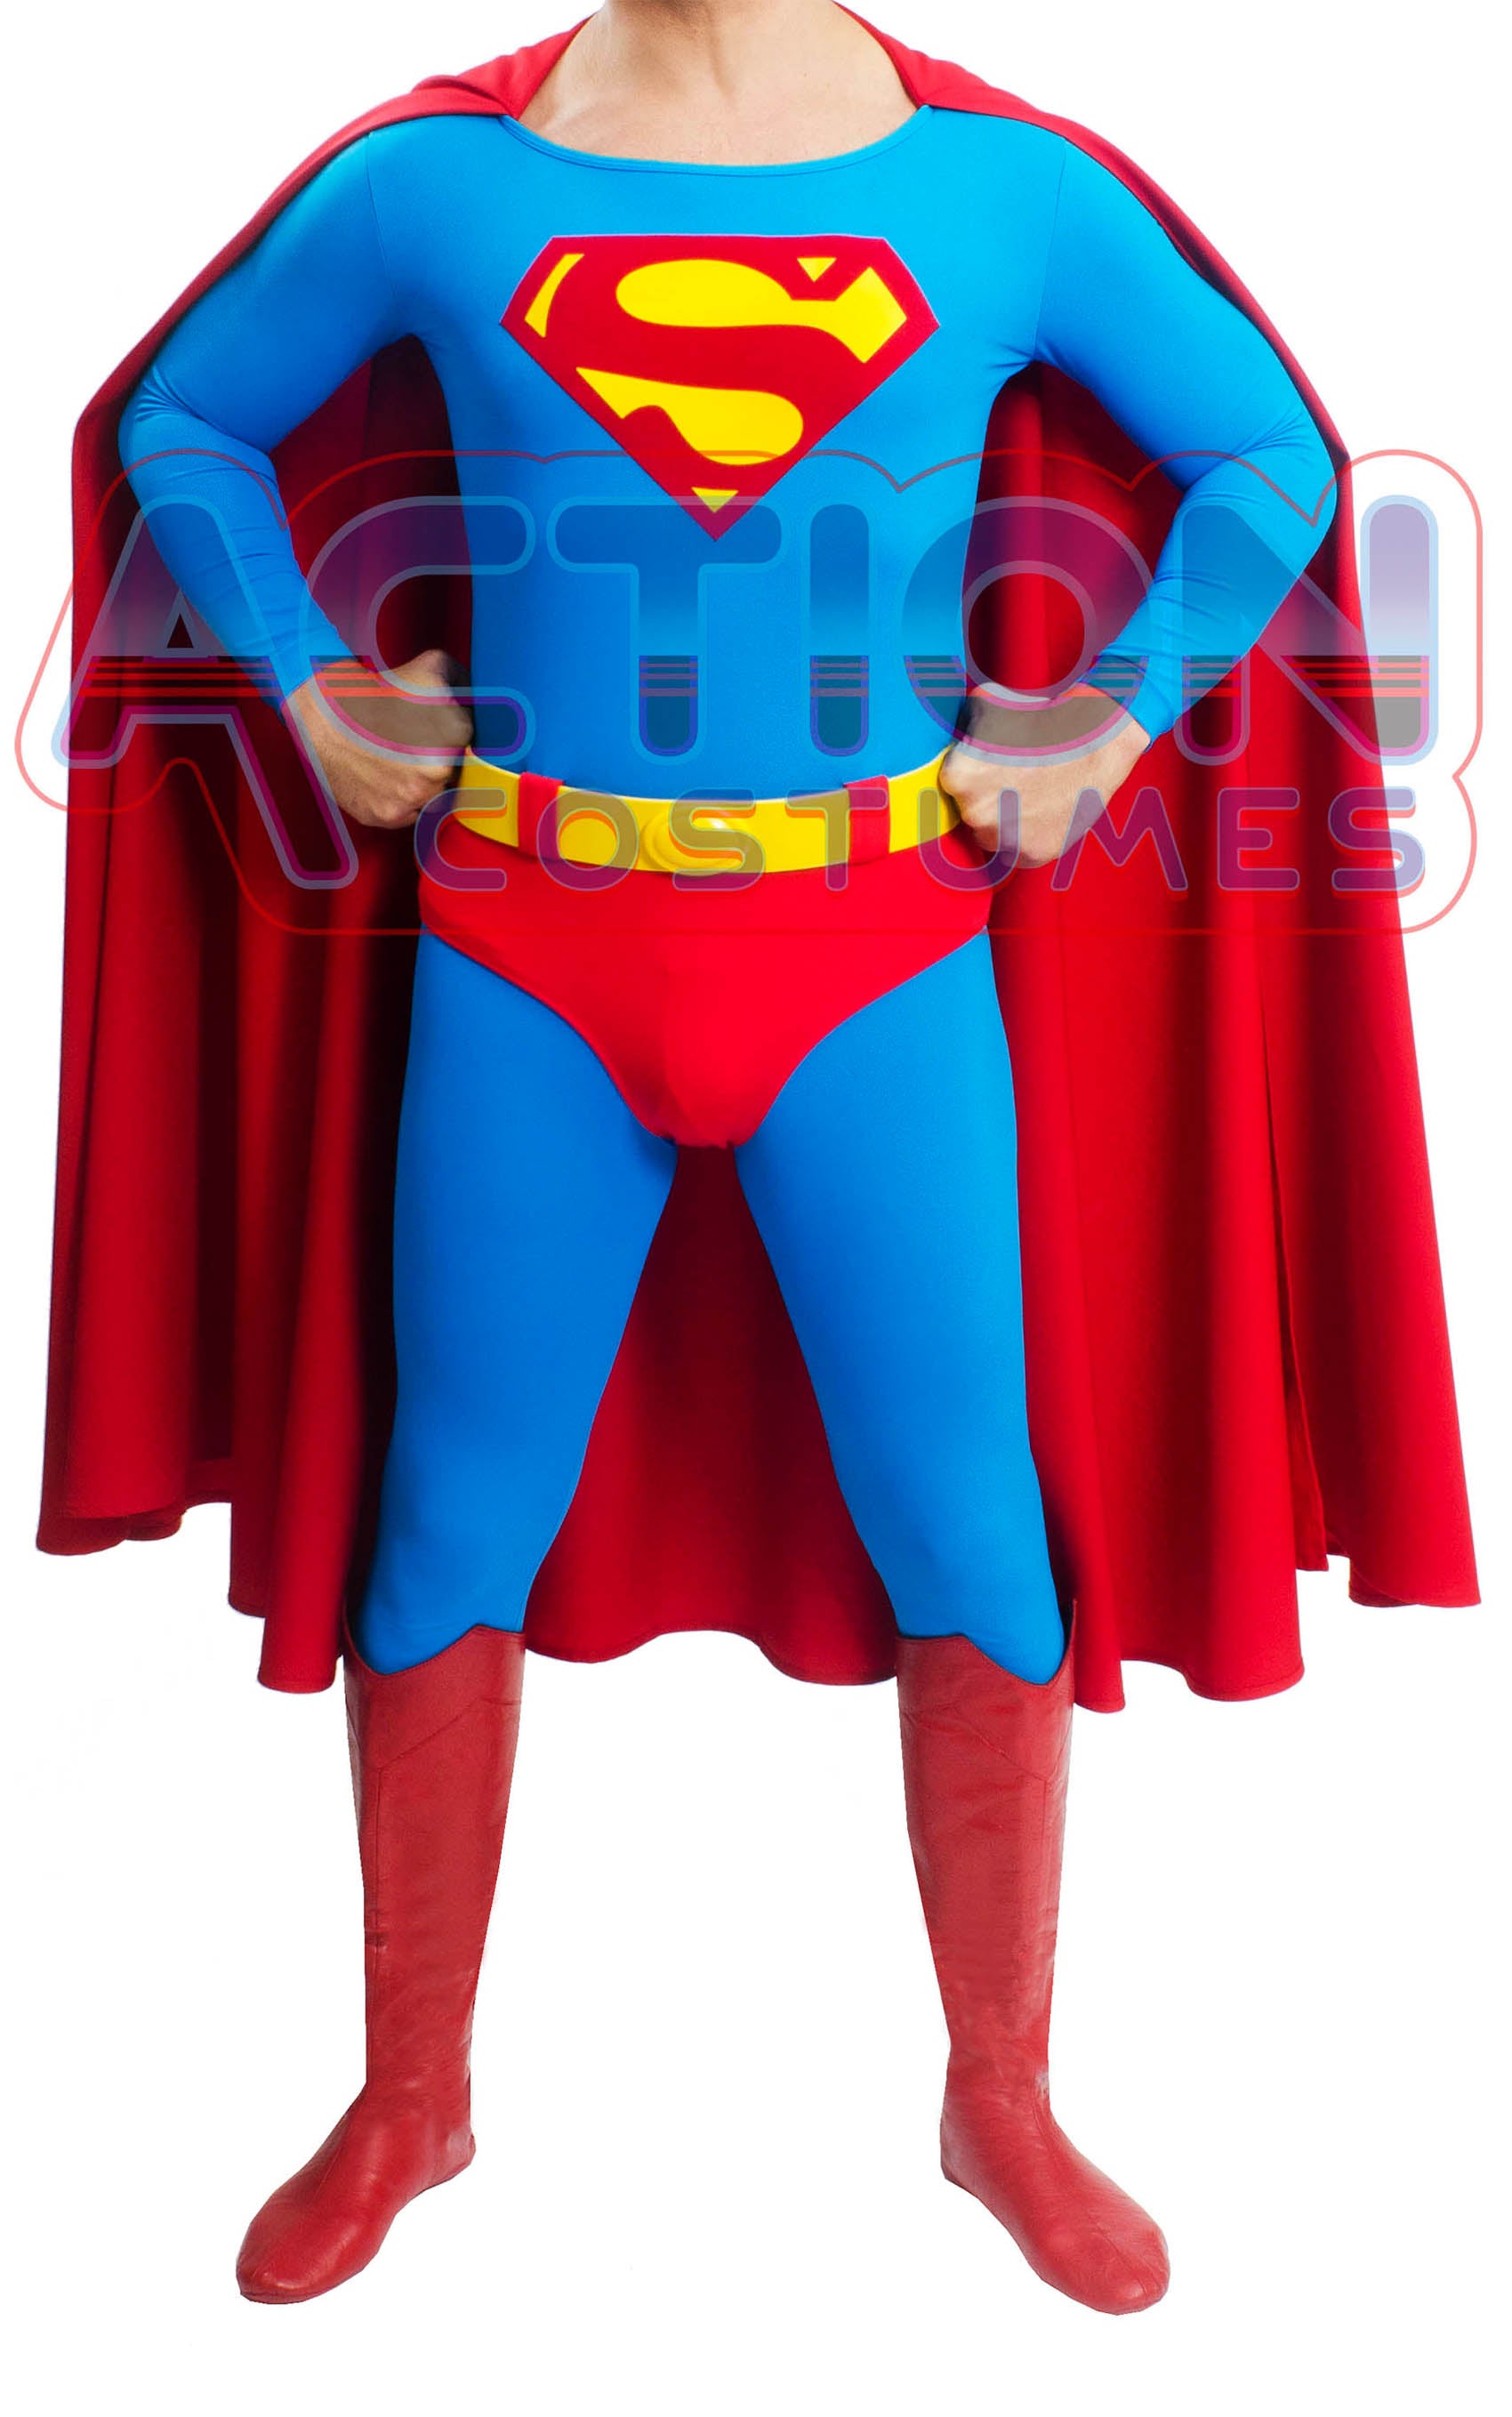 superman-costume-80s-style-without-boots